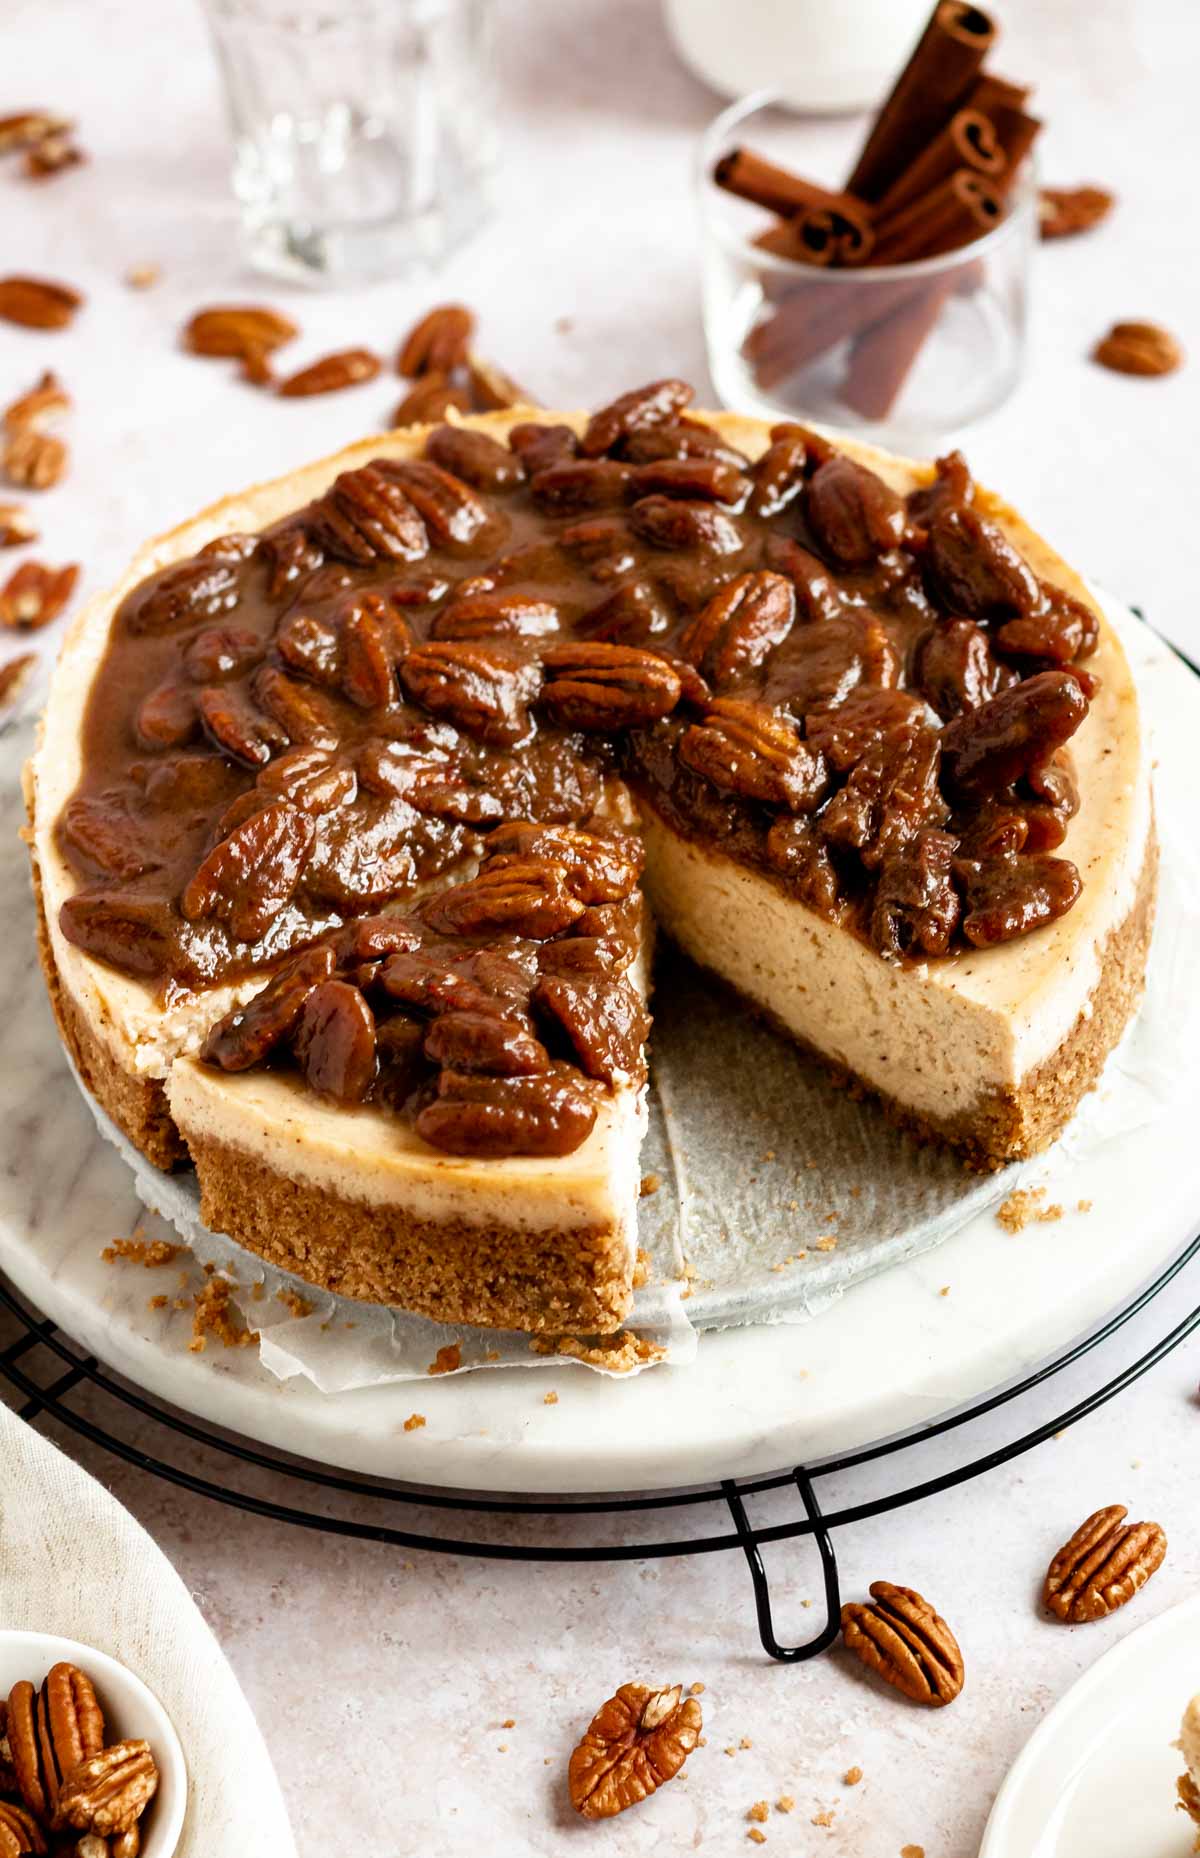 Slice missing from a caramel pecan cheesecake.